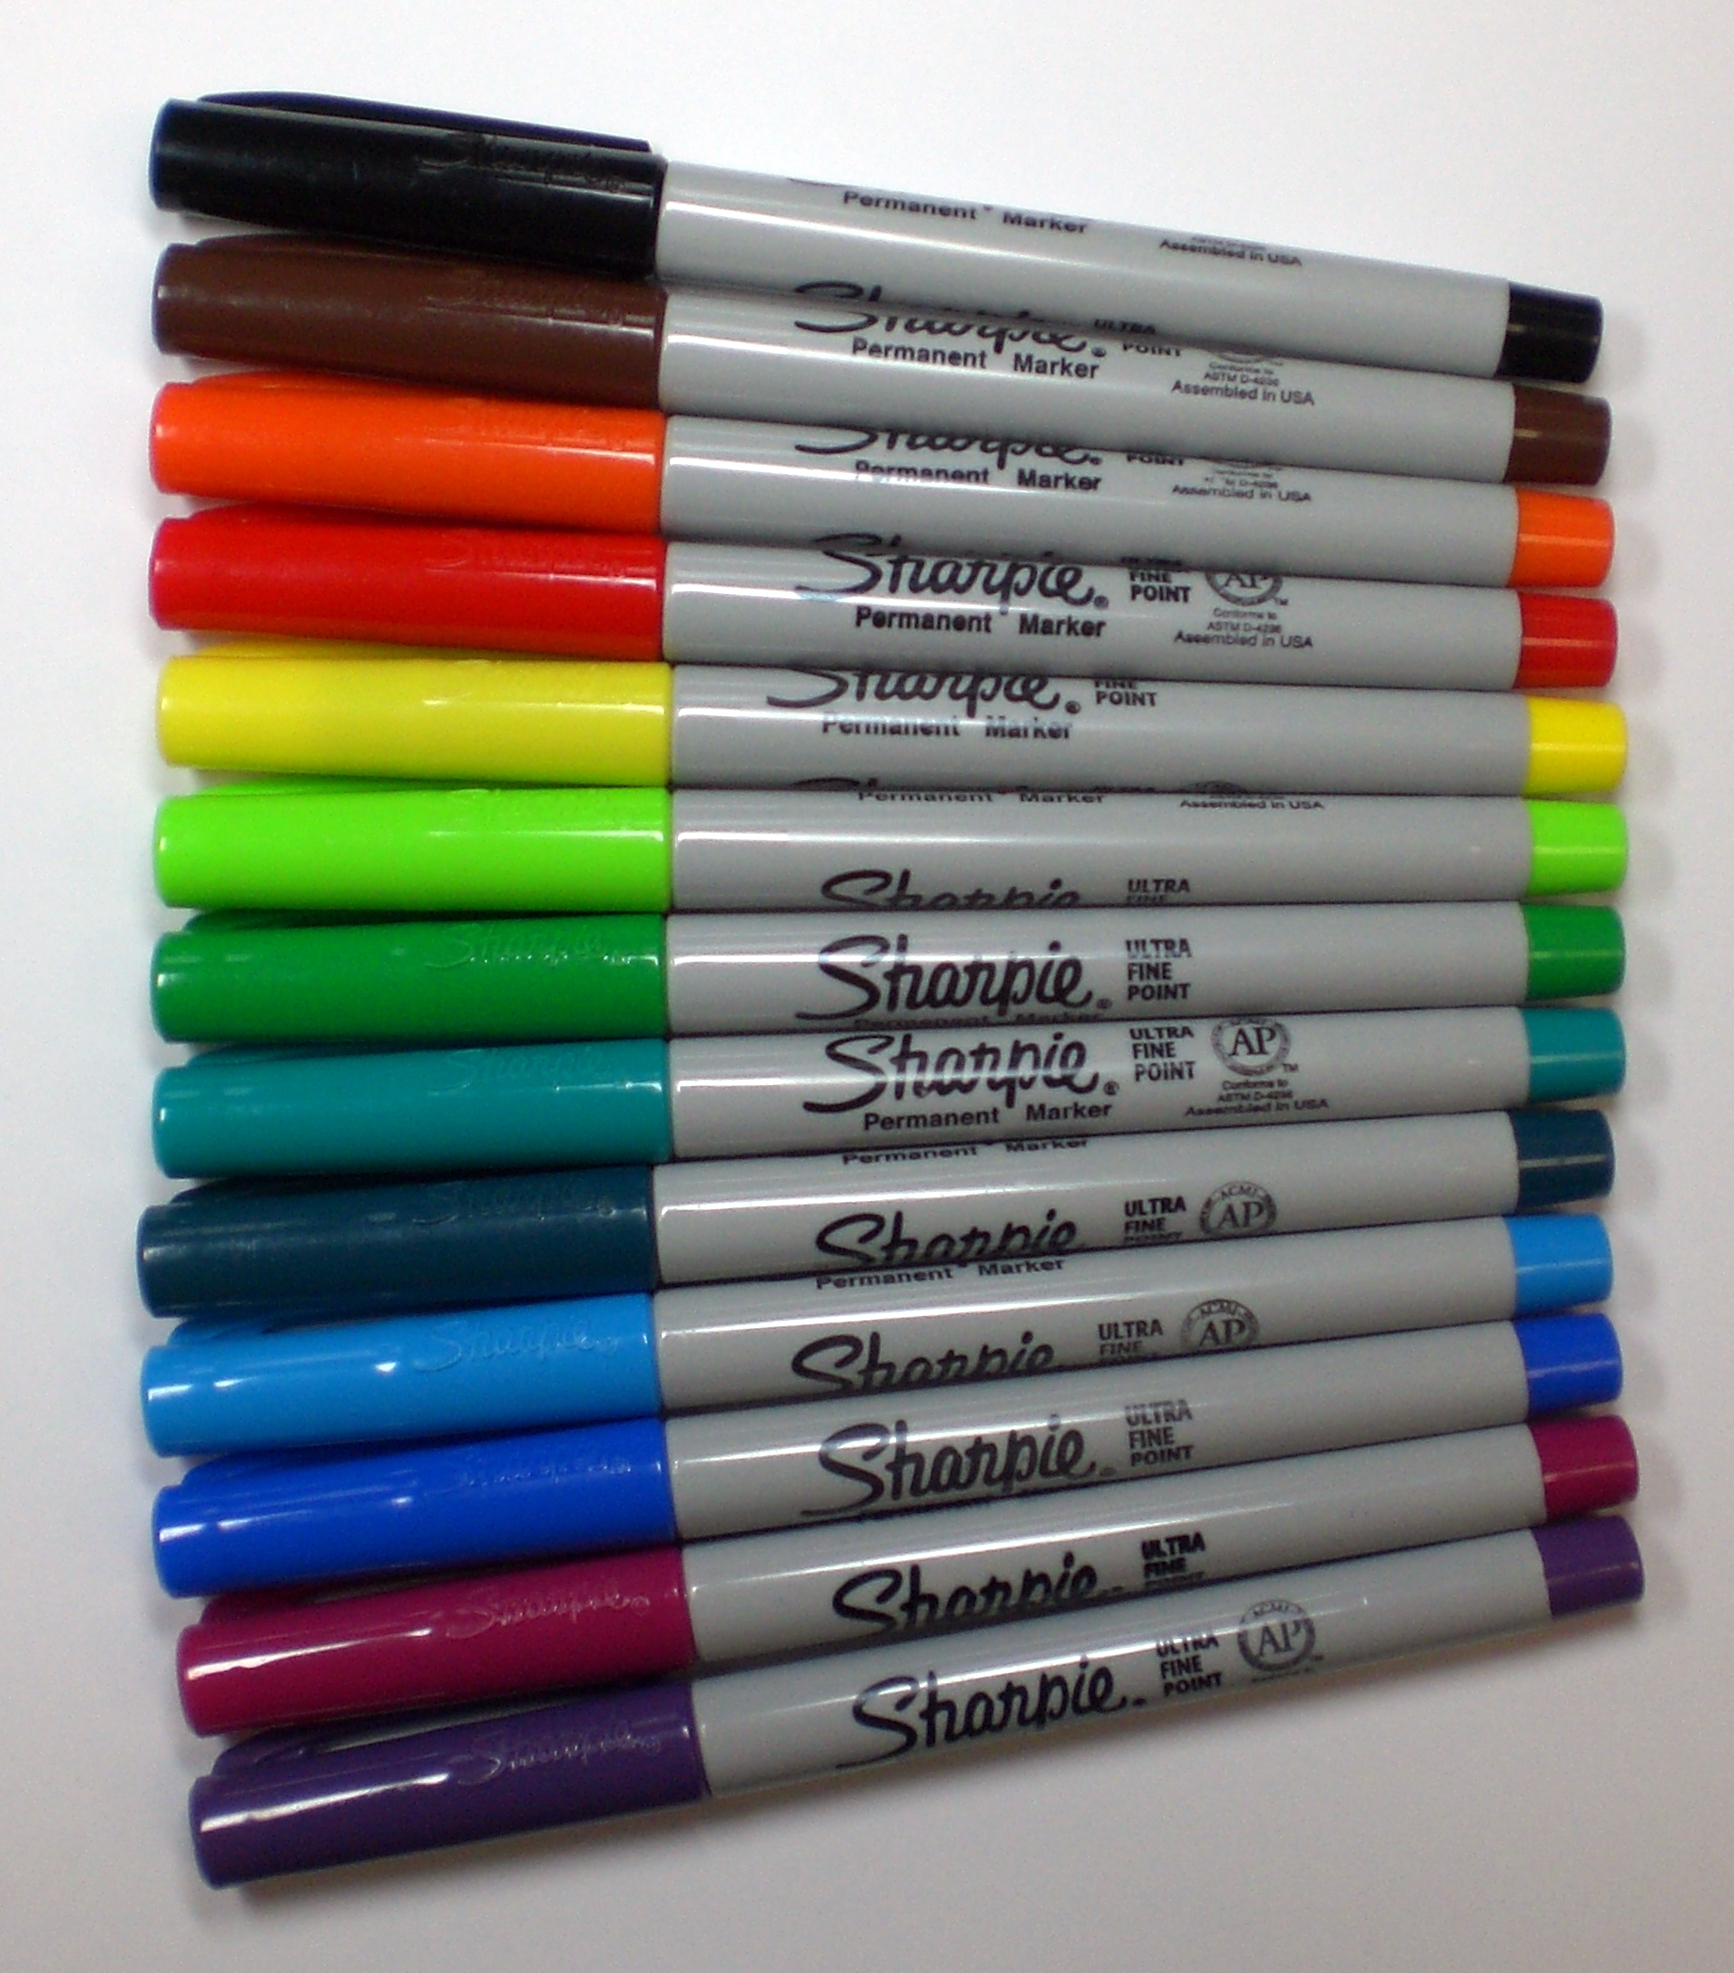 Sanford Sharpie Ultra Fine Point 12 1 Colors Pens N BEDECOR Free Coloring Picture wallpaper give a chance to color on the wall without getting in trouble! Fill the walls of your home or office with stress-relieving [bedroomdecorz.blogspot.com]